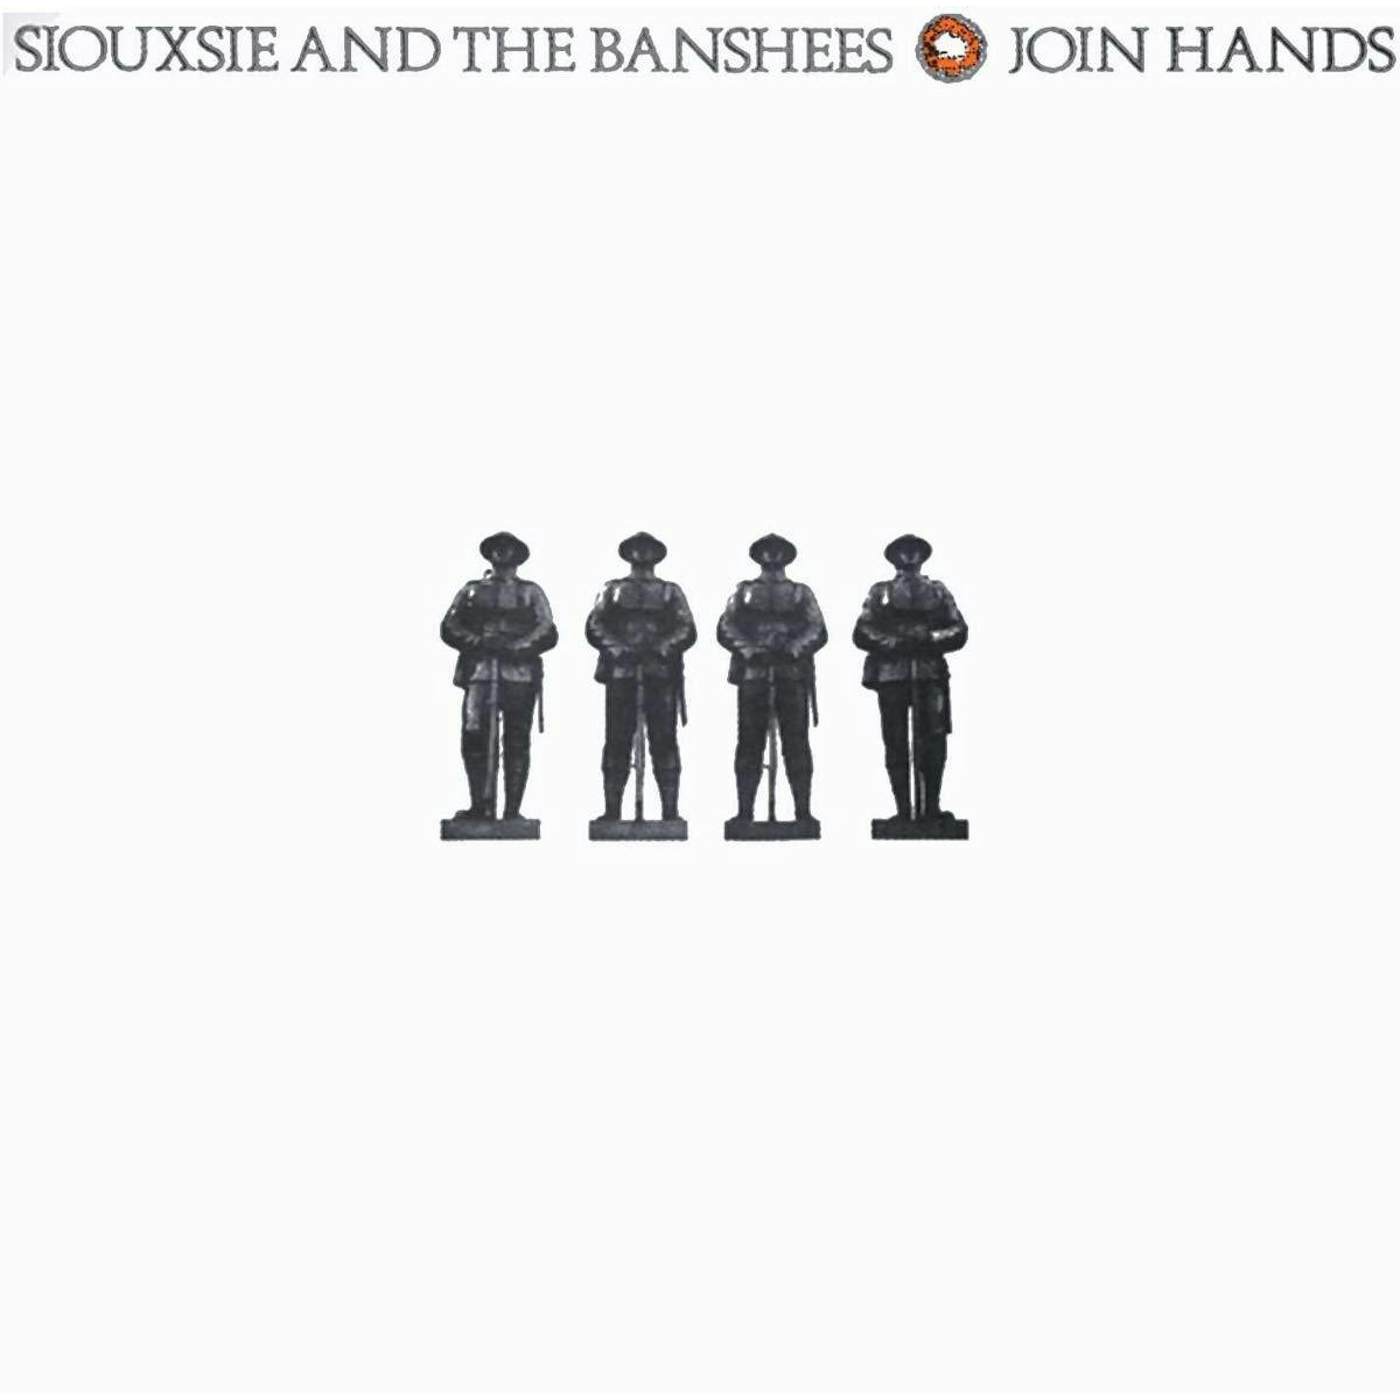 Siouxsie and the Banshees Join Hands